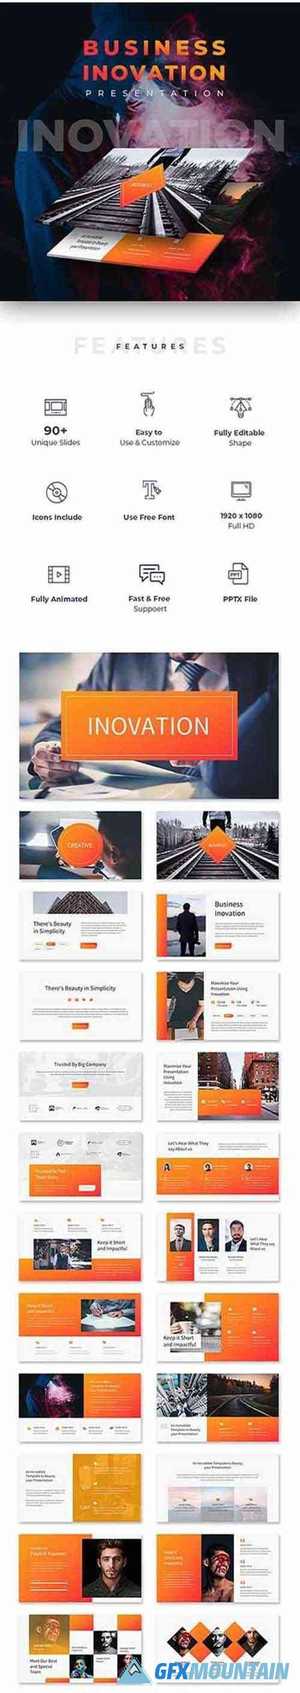 Business Inovation Powerpoint Template 22919959